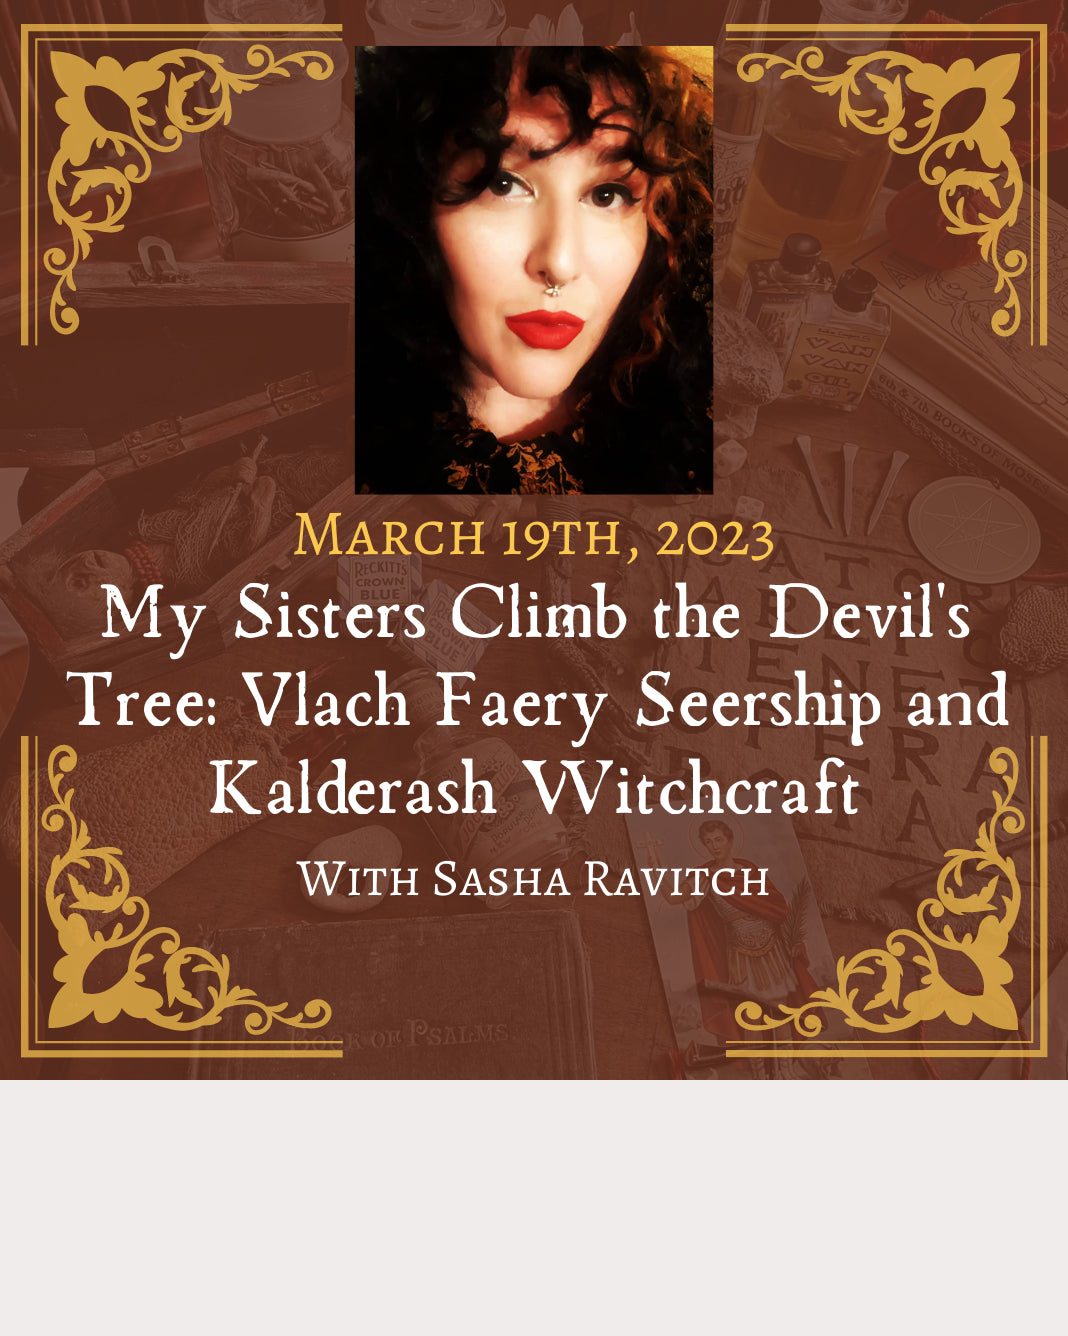 My Sisters Climb the Devil’s Tree: Vlach Faery Seership and Kalderash Witchcraft with Sasha Ravitch